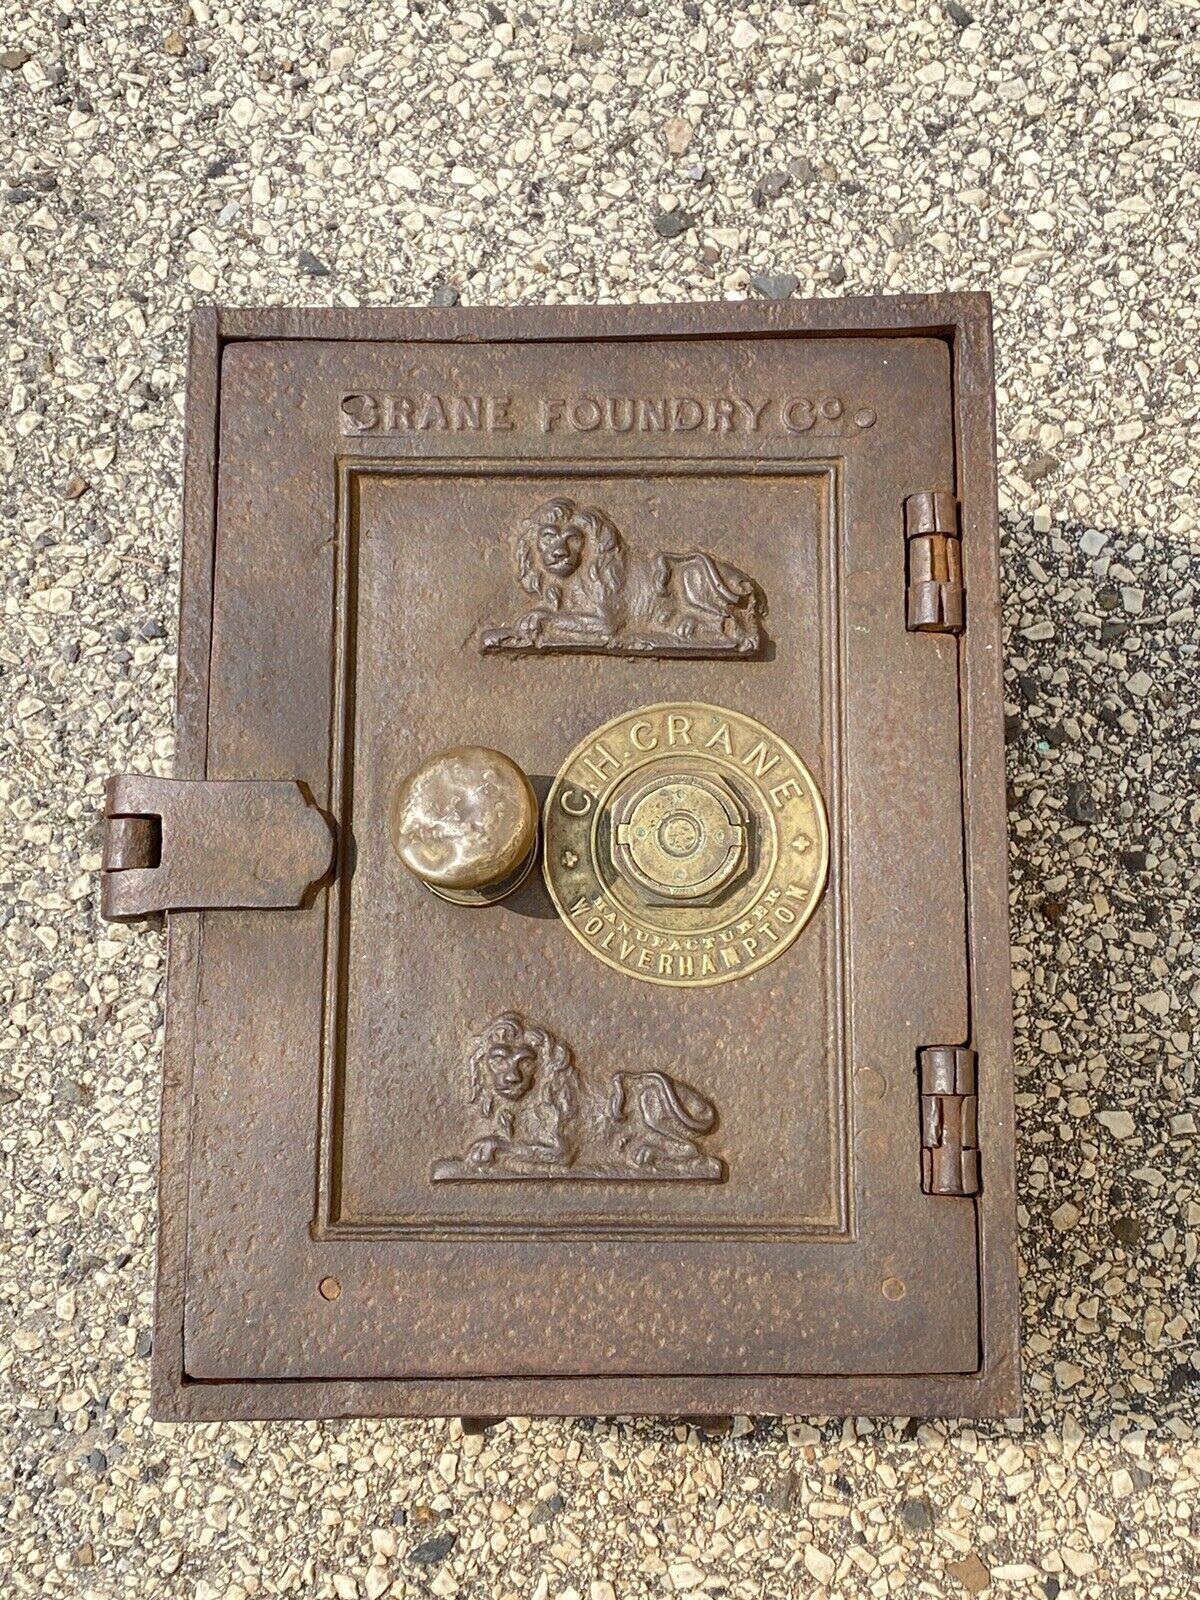 Antique Cast Iron Crane Foundry Co C.H. Crane Ship Strongbox Safe with Lions. Item features a very heavy cast iron construction, figural lion relief, brass accents, original makers stamp, no key but unlocked, twin handles, very nice antique item,